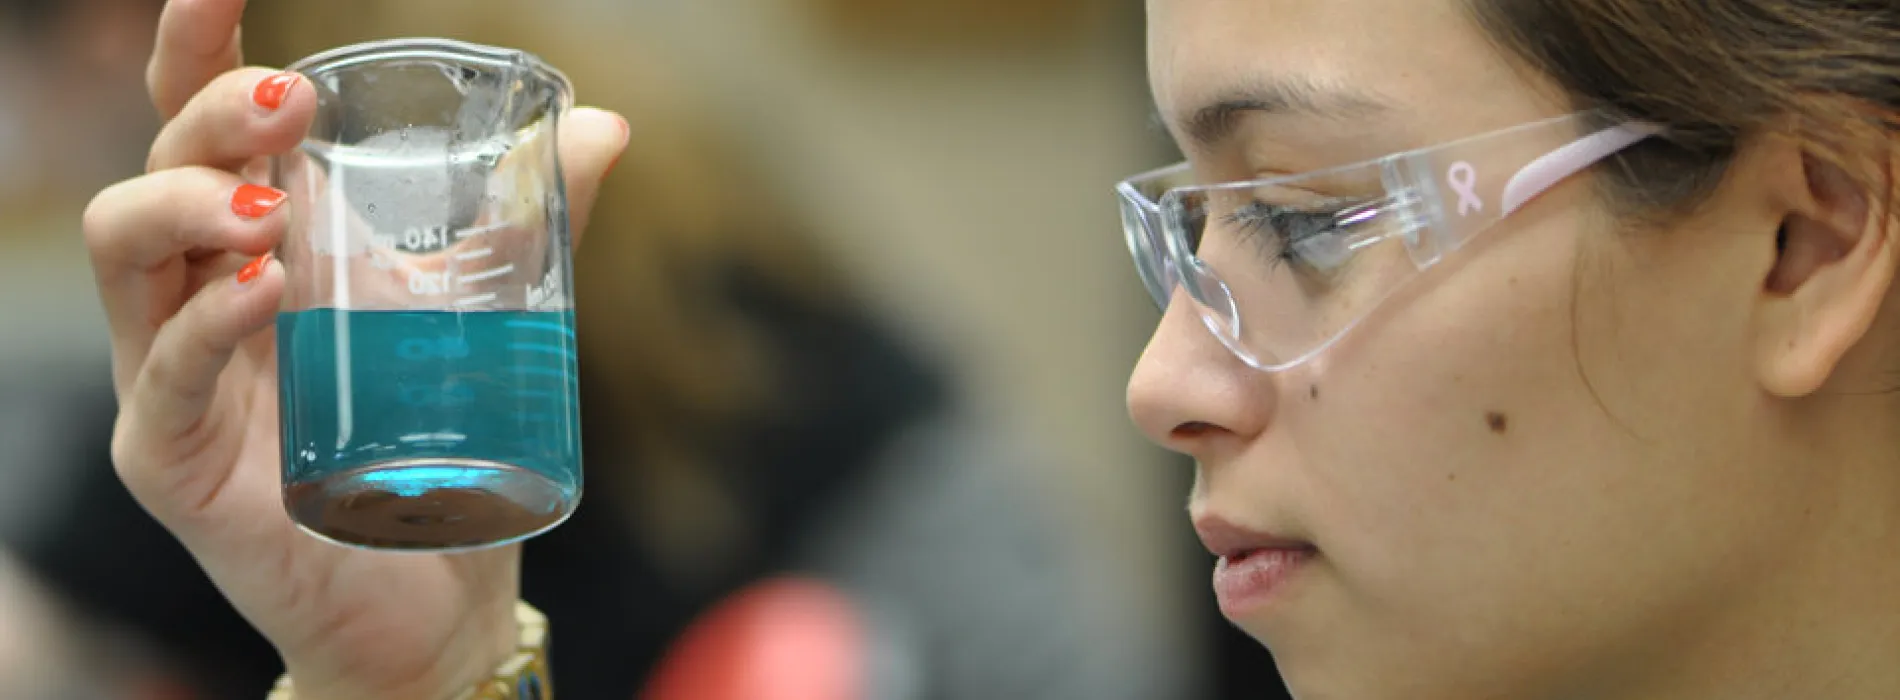 female student wearing safety glasses looking into a beaker with blue liquid 